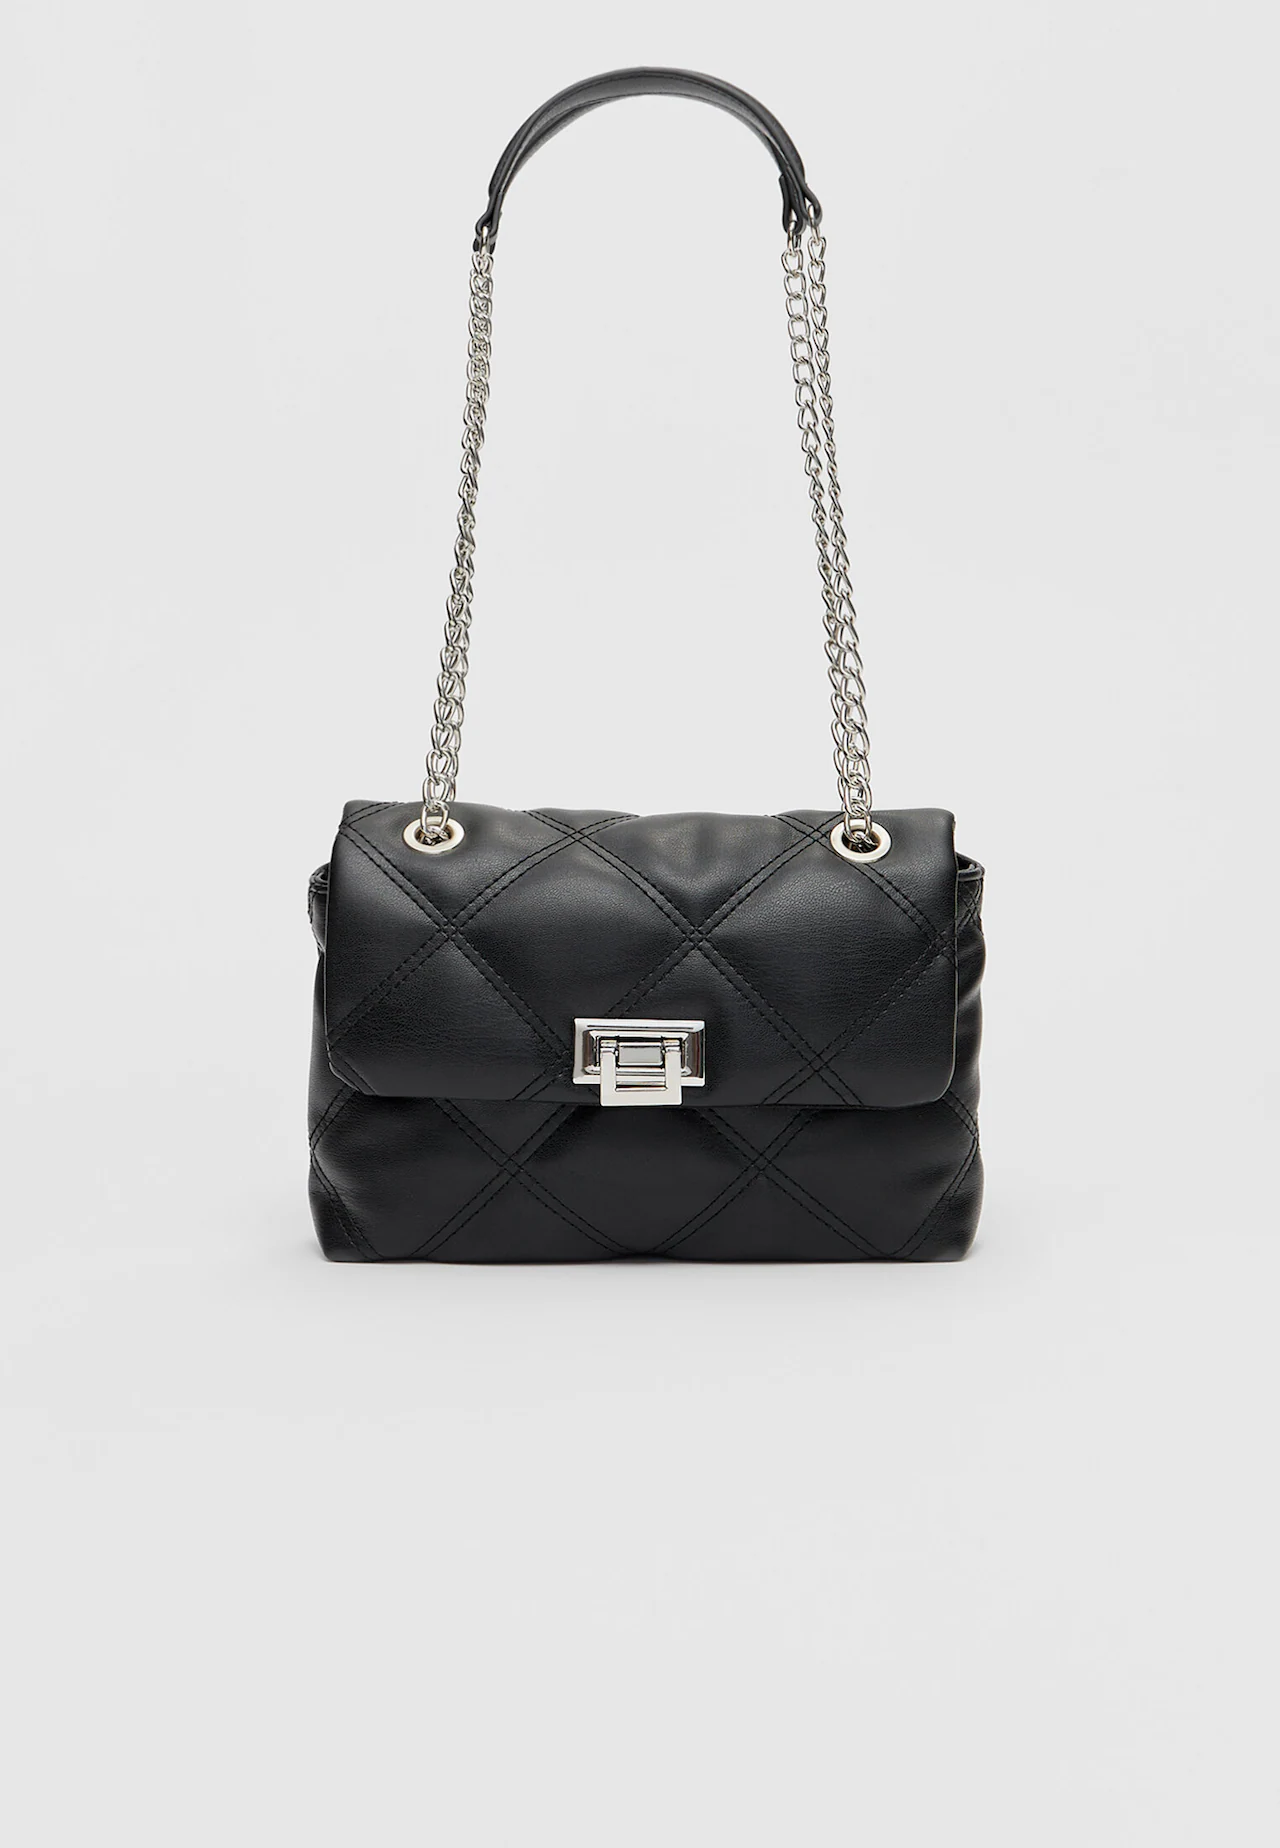 Quilted Chain Strap Bag - Black